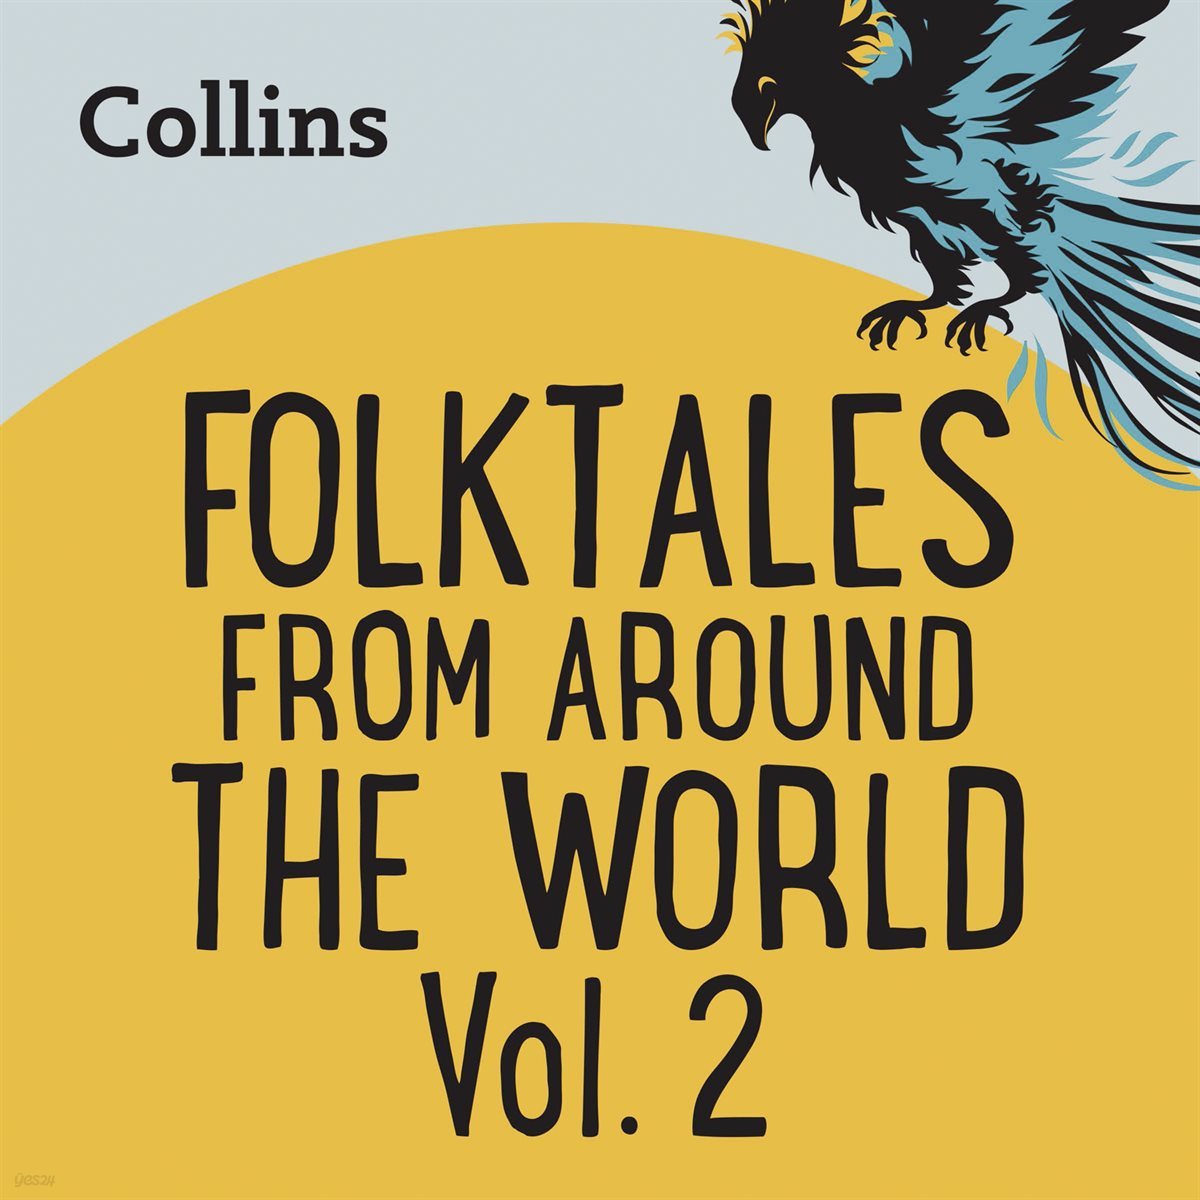 [US Eng] FOLKTALES FROM AROUND THE WORLD VOL 2: For ages 7-11 -Collins